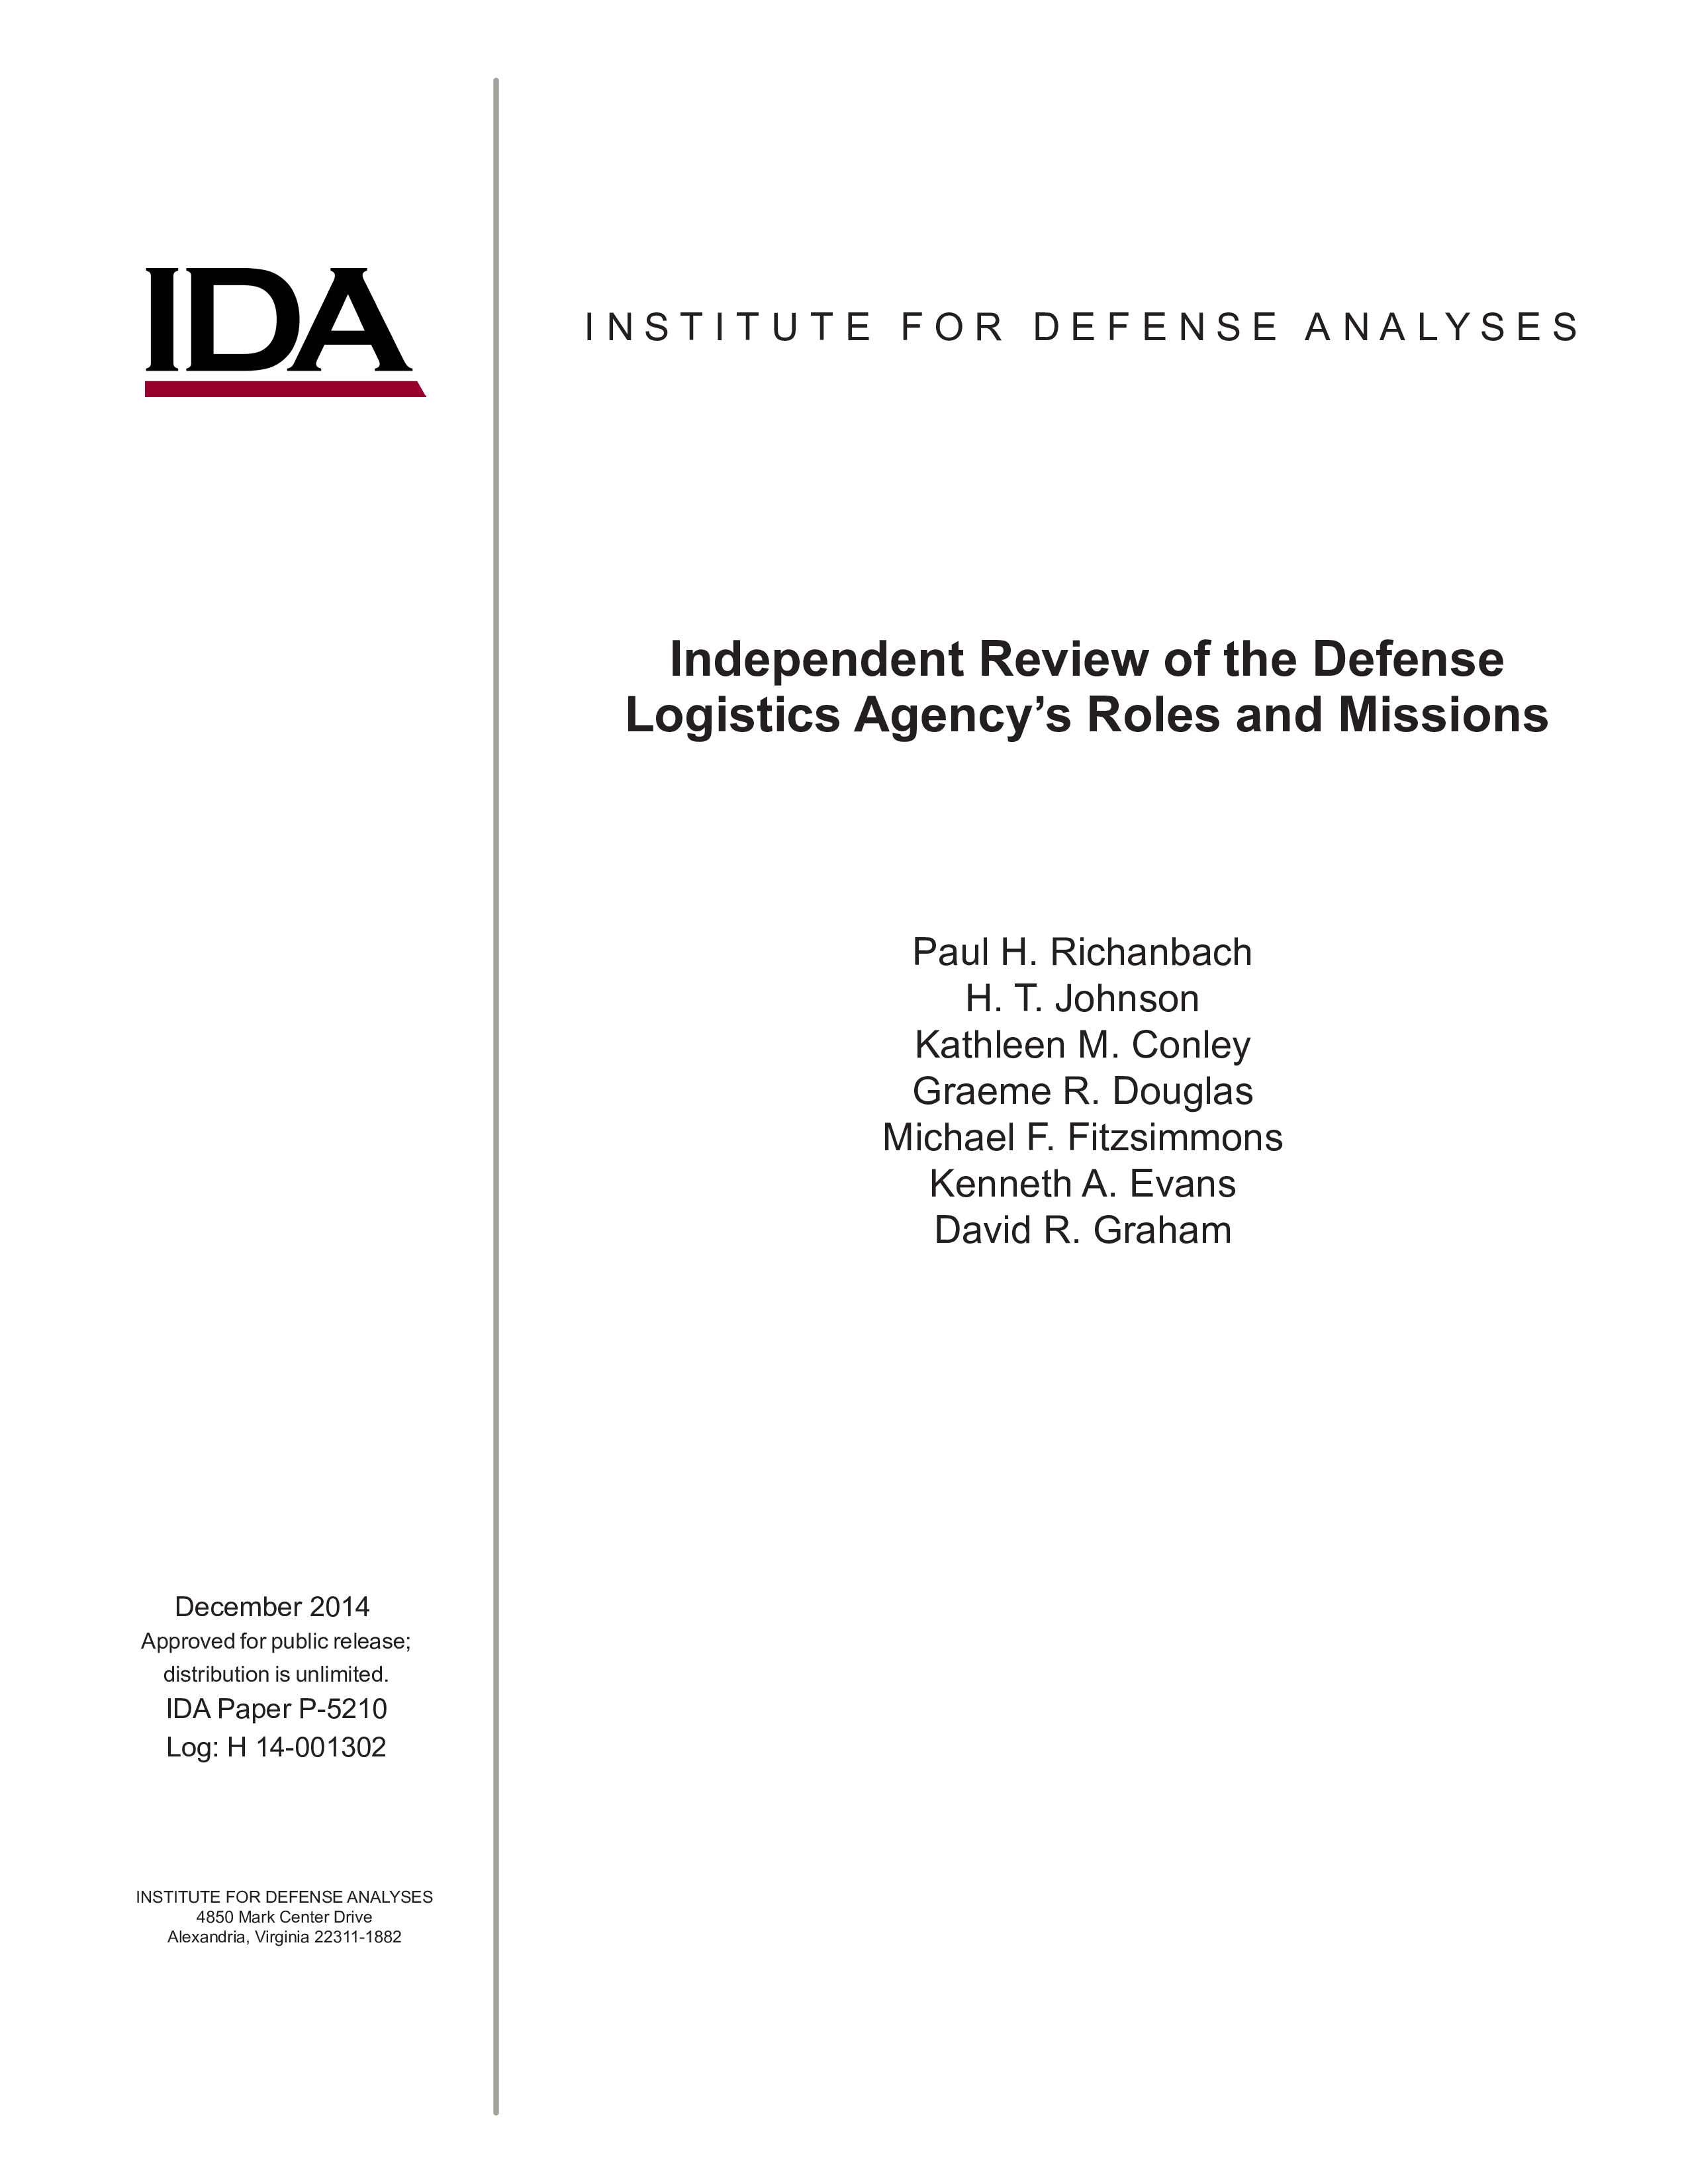 Independent Review of the Defense Logistics Agency’s Roles and Missions